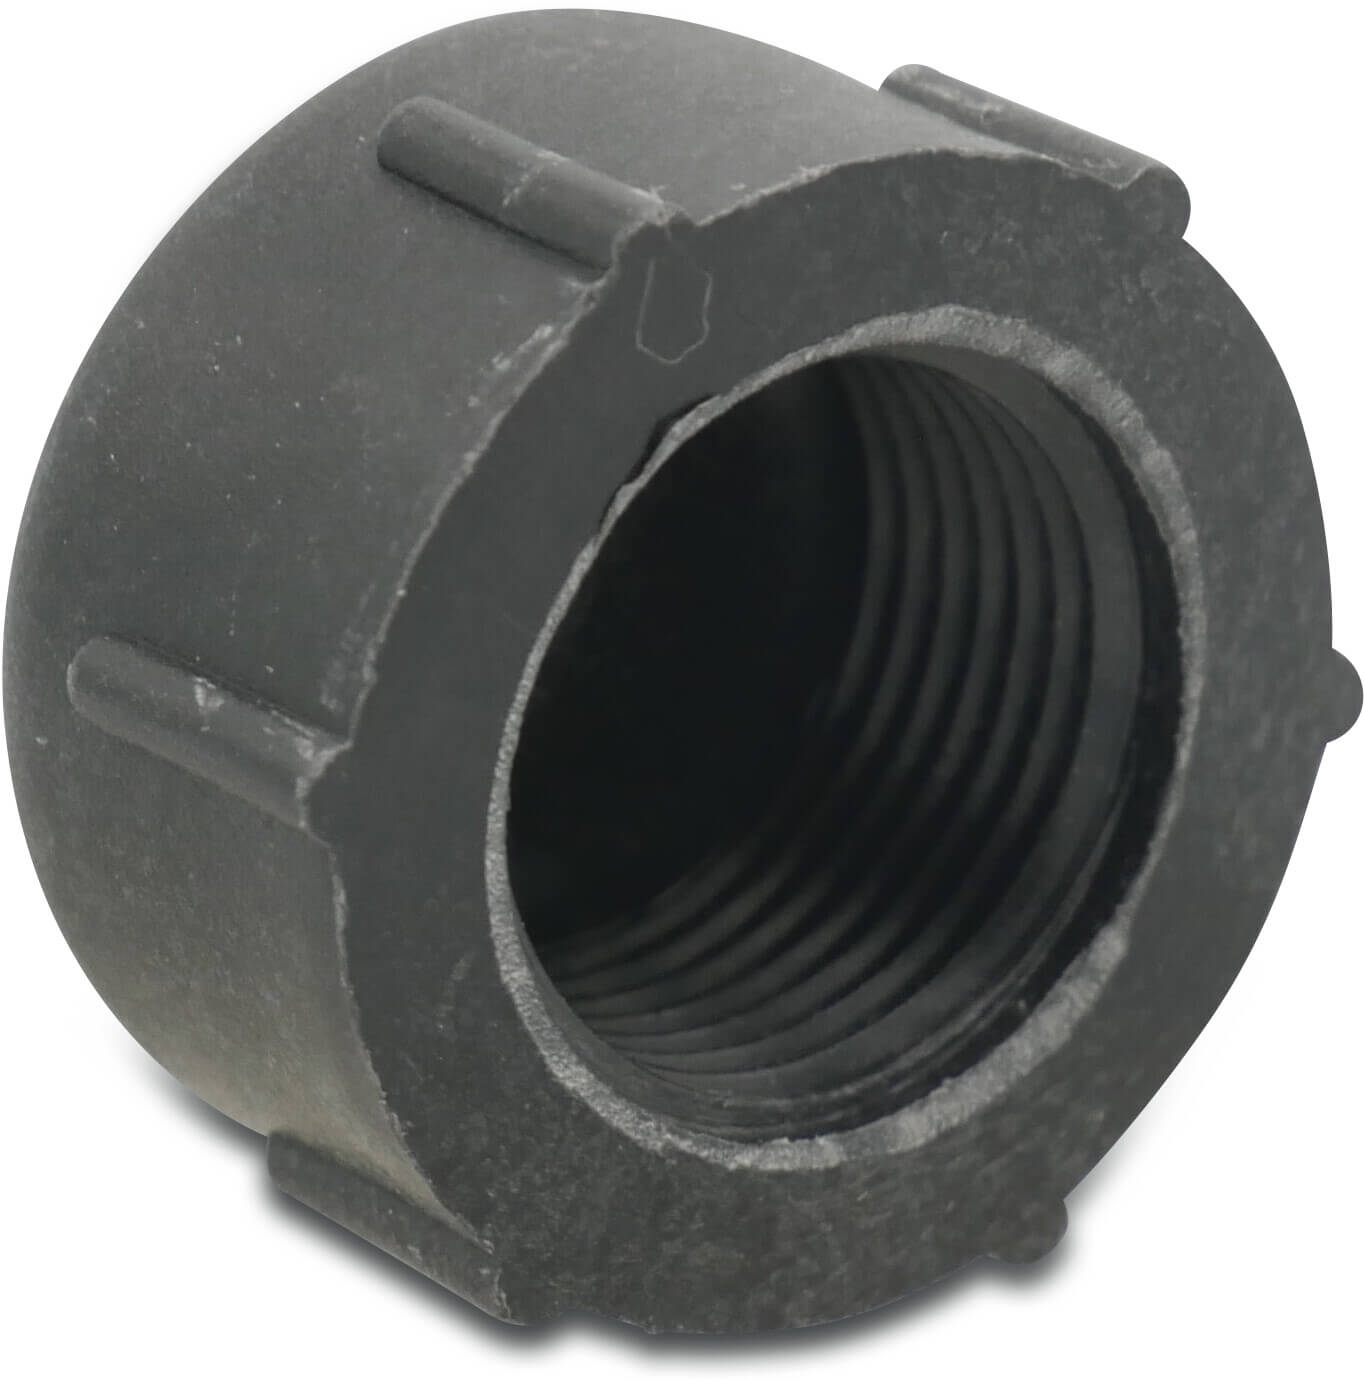 Drain cap with O-ring for SS pump